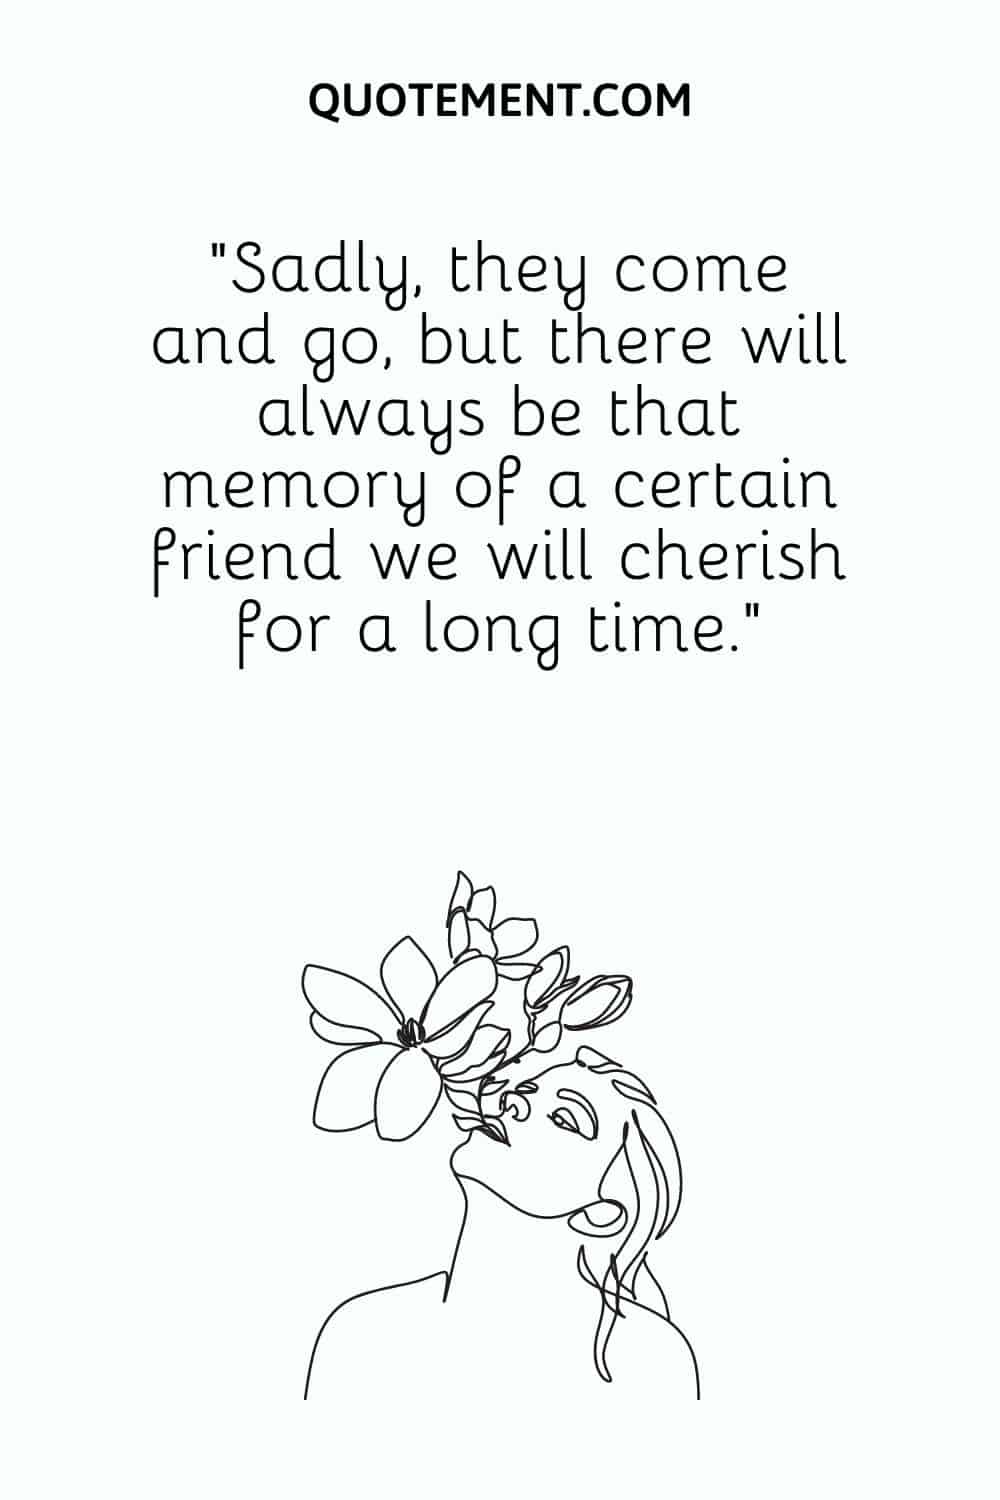 Sadly, they come and go, but there will always be that memory of a certain friend we will cherish for a long time